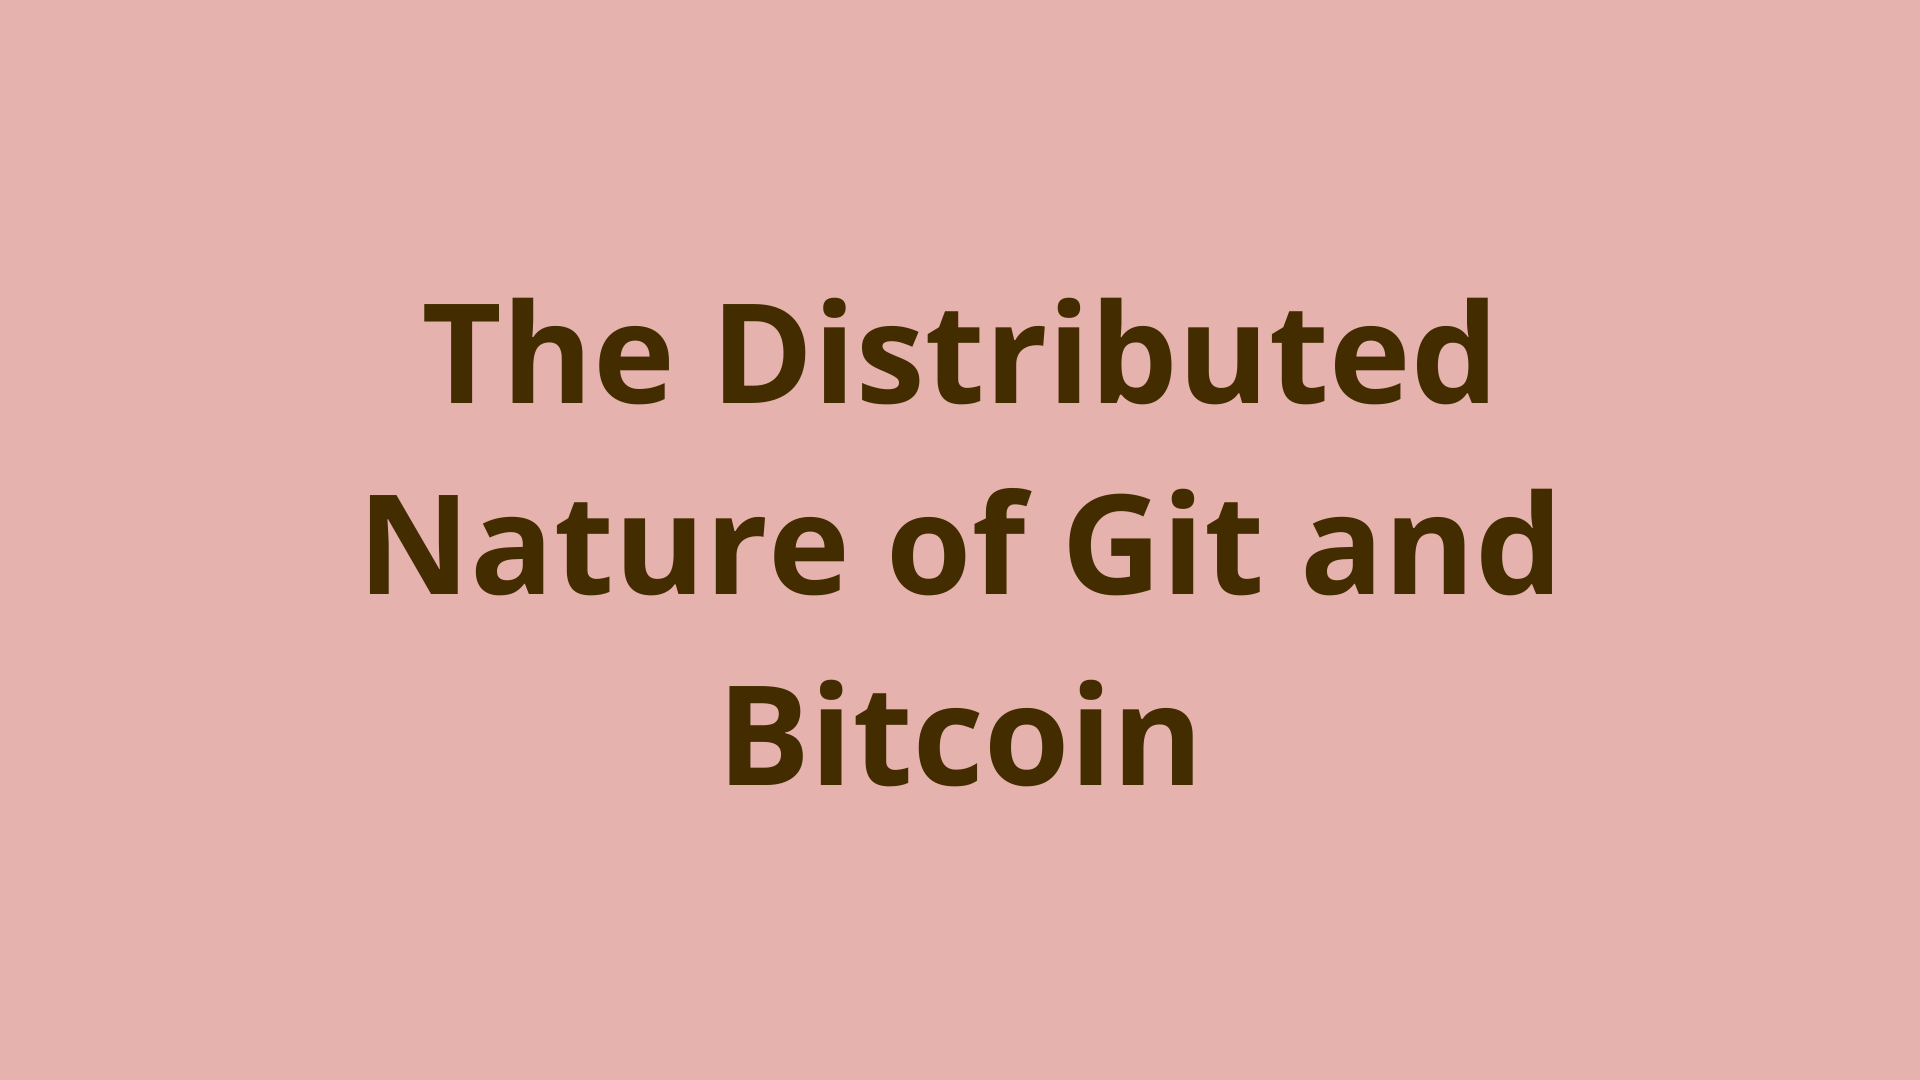 Image of The Distributed Nature of Git and Bitcoin